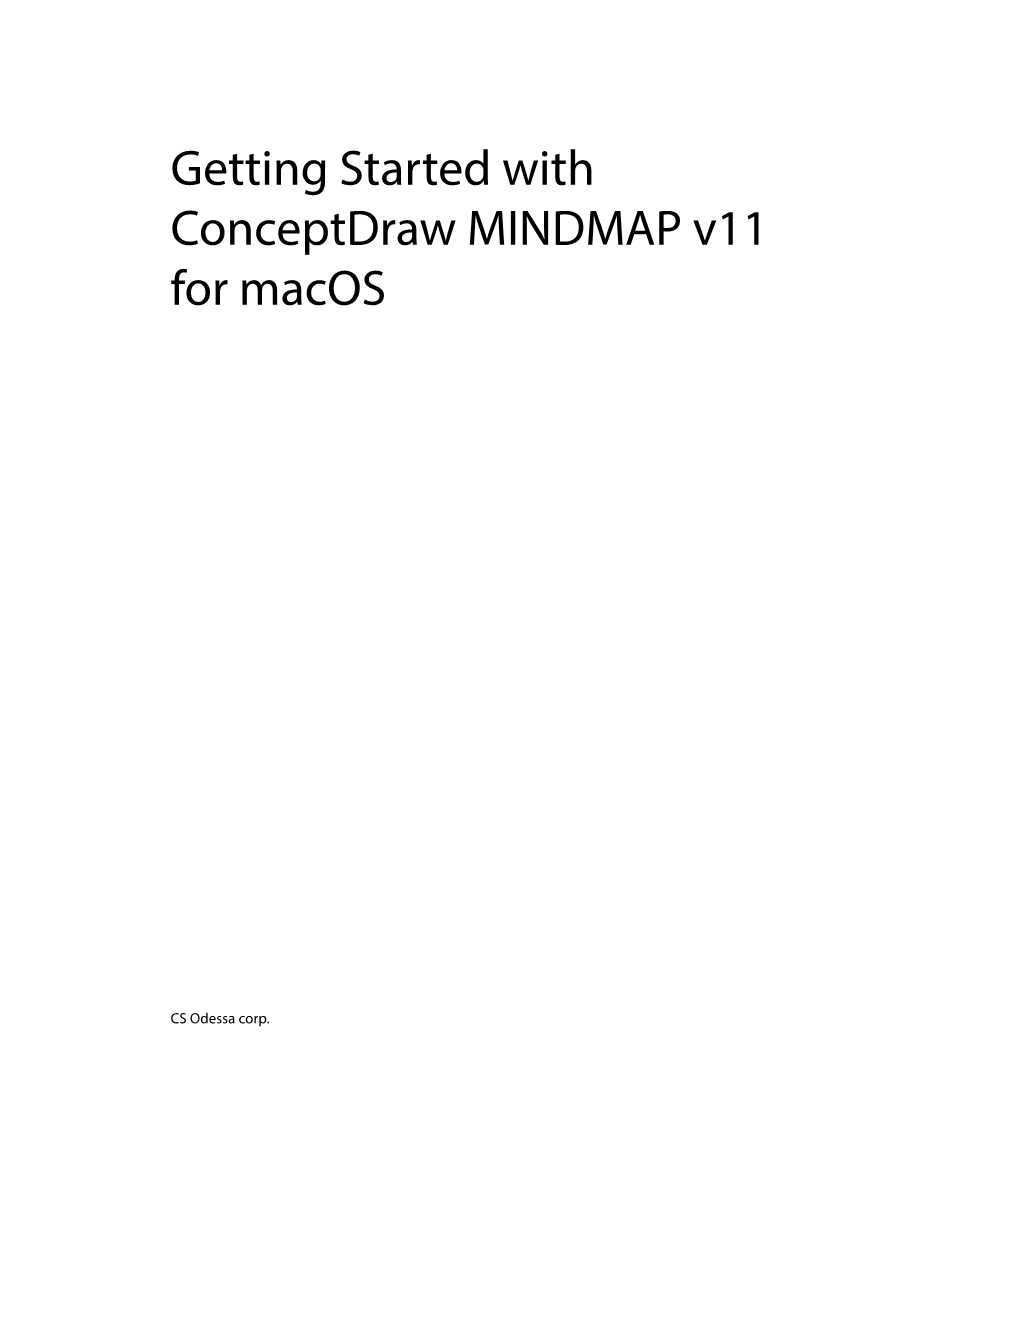 Getting Started with Conceptdraw MINDMAP for Mac OS